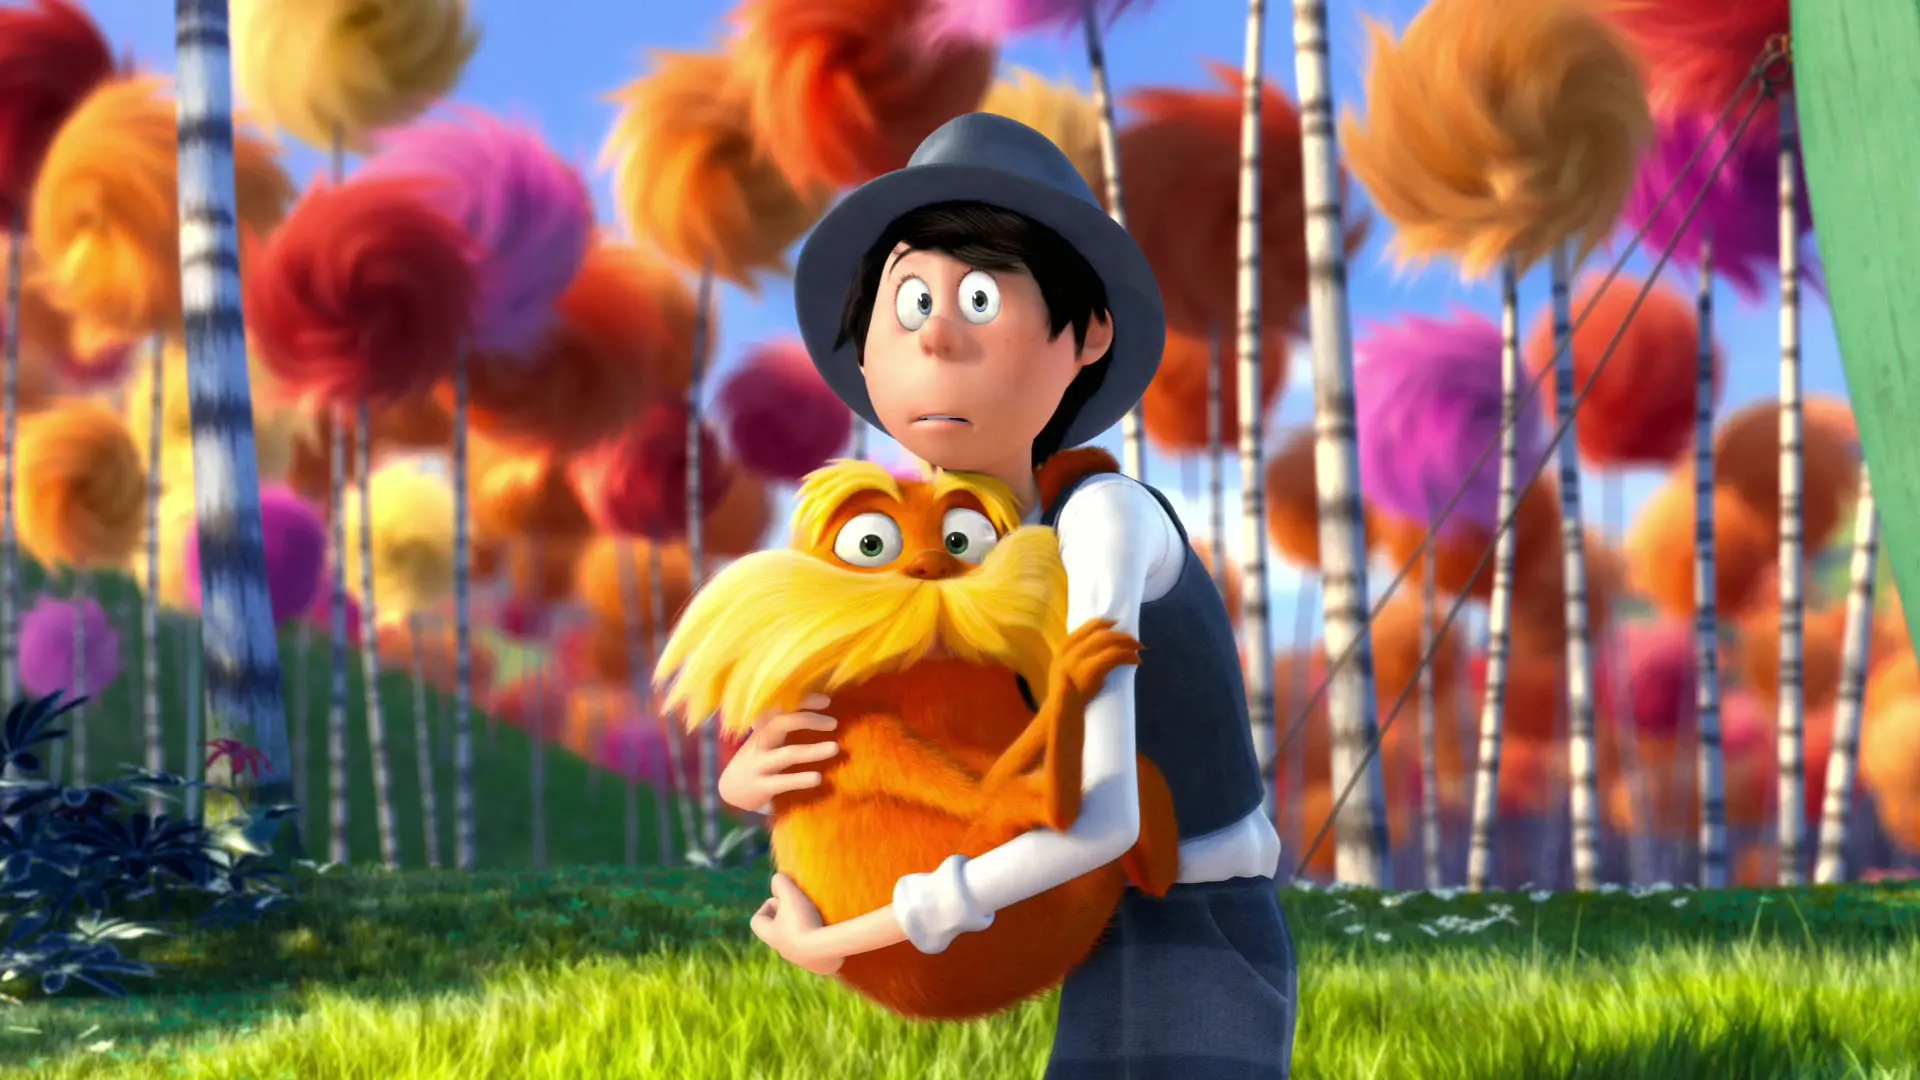 Movie The Lorax wallpaper 8 | Background Image